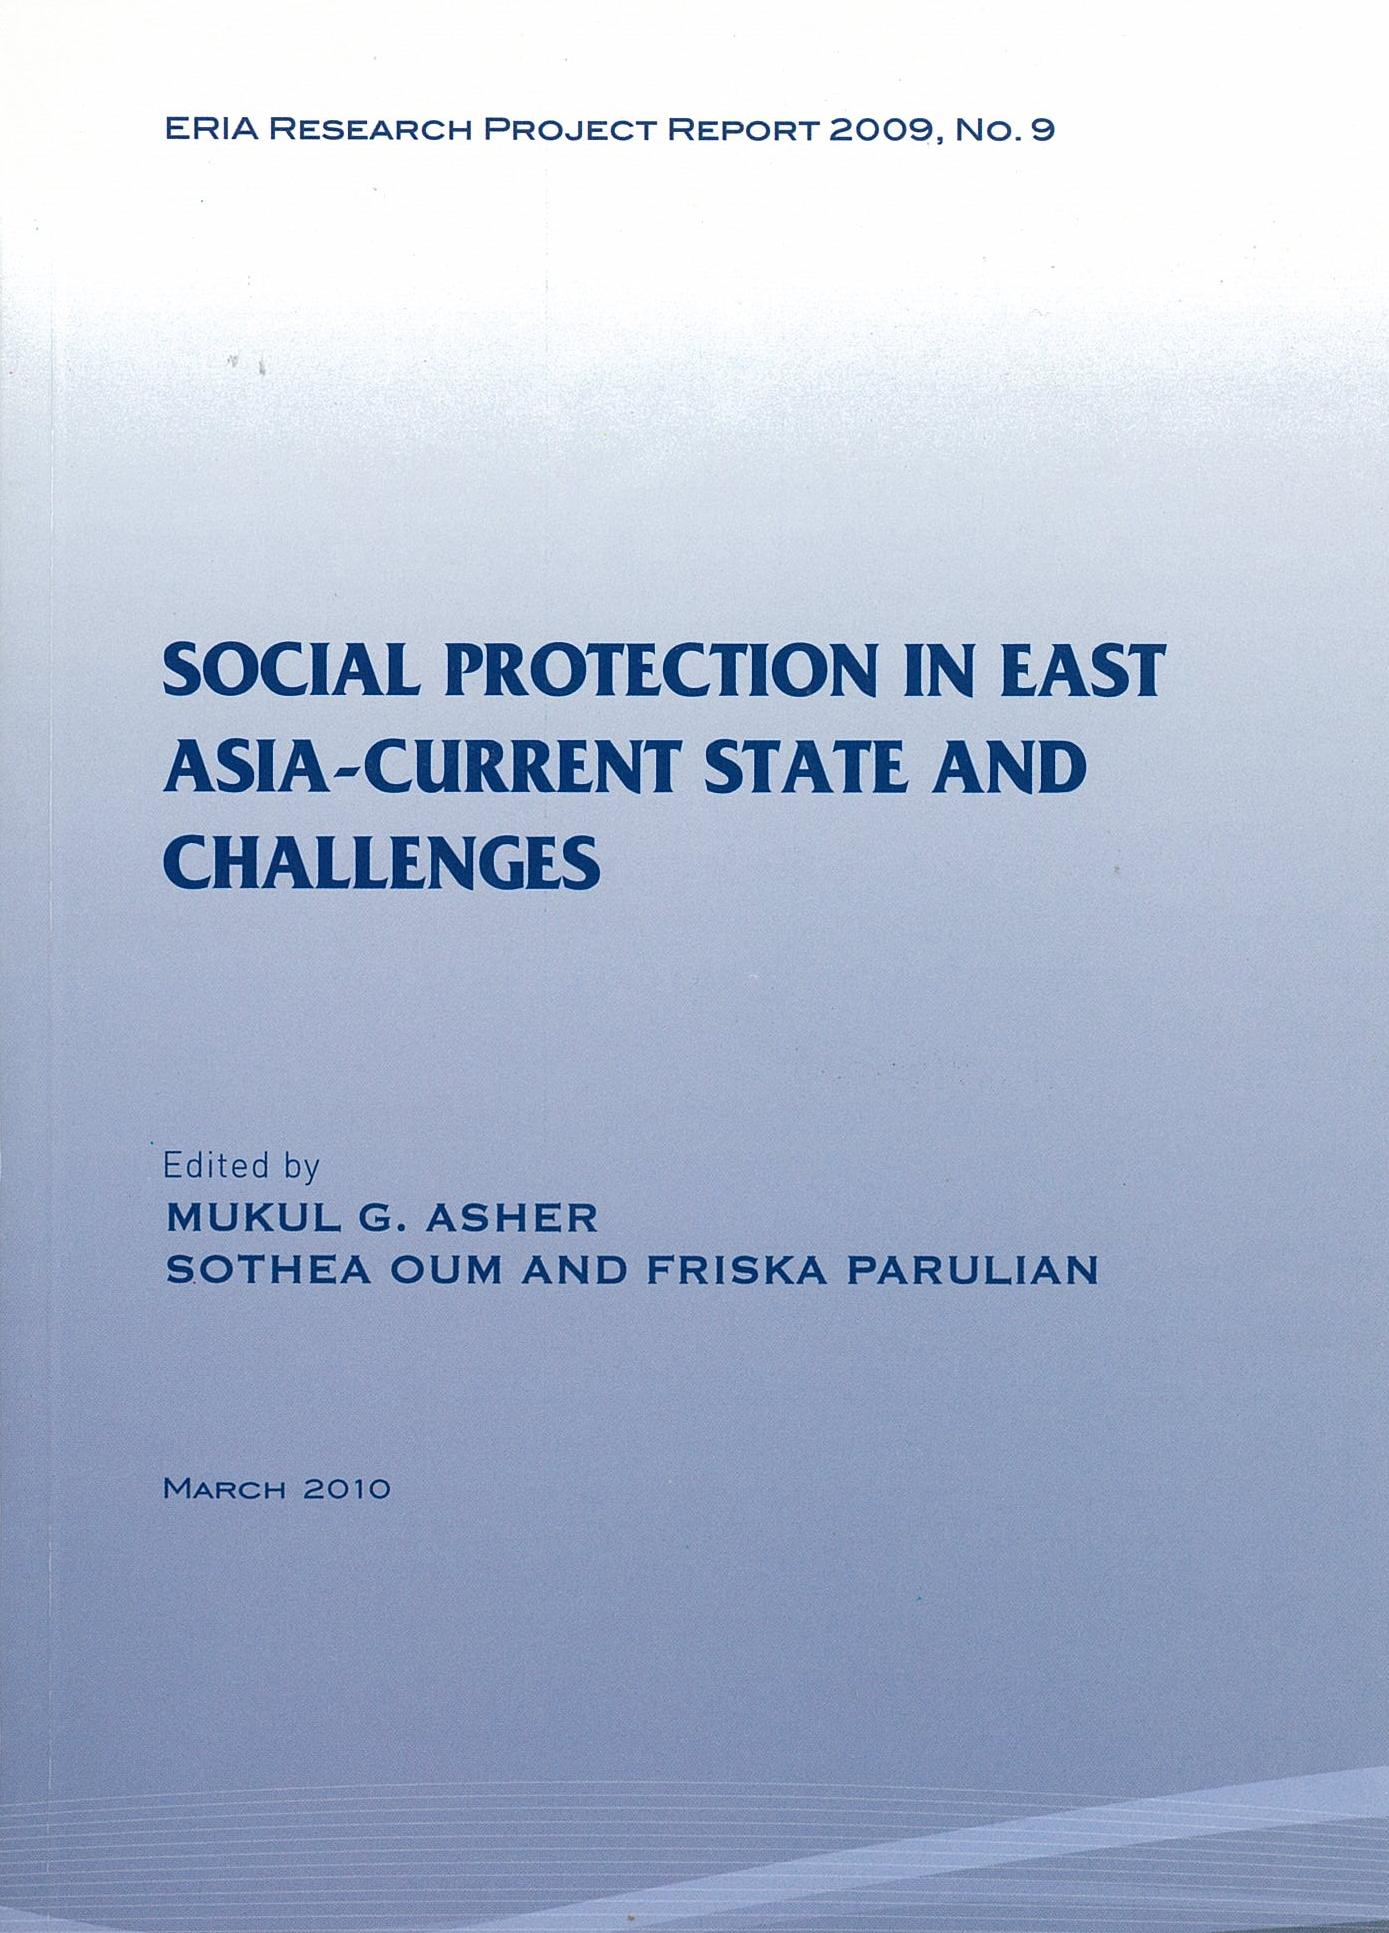 Social Protection in East Asia - Current State and Challenges